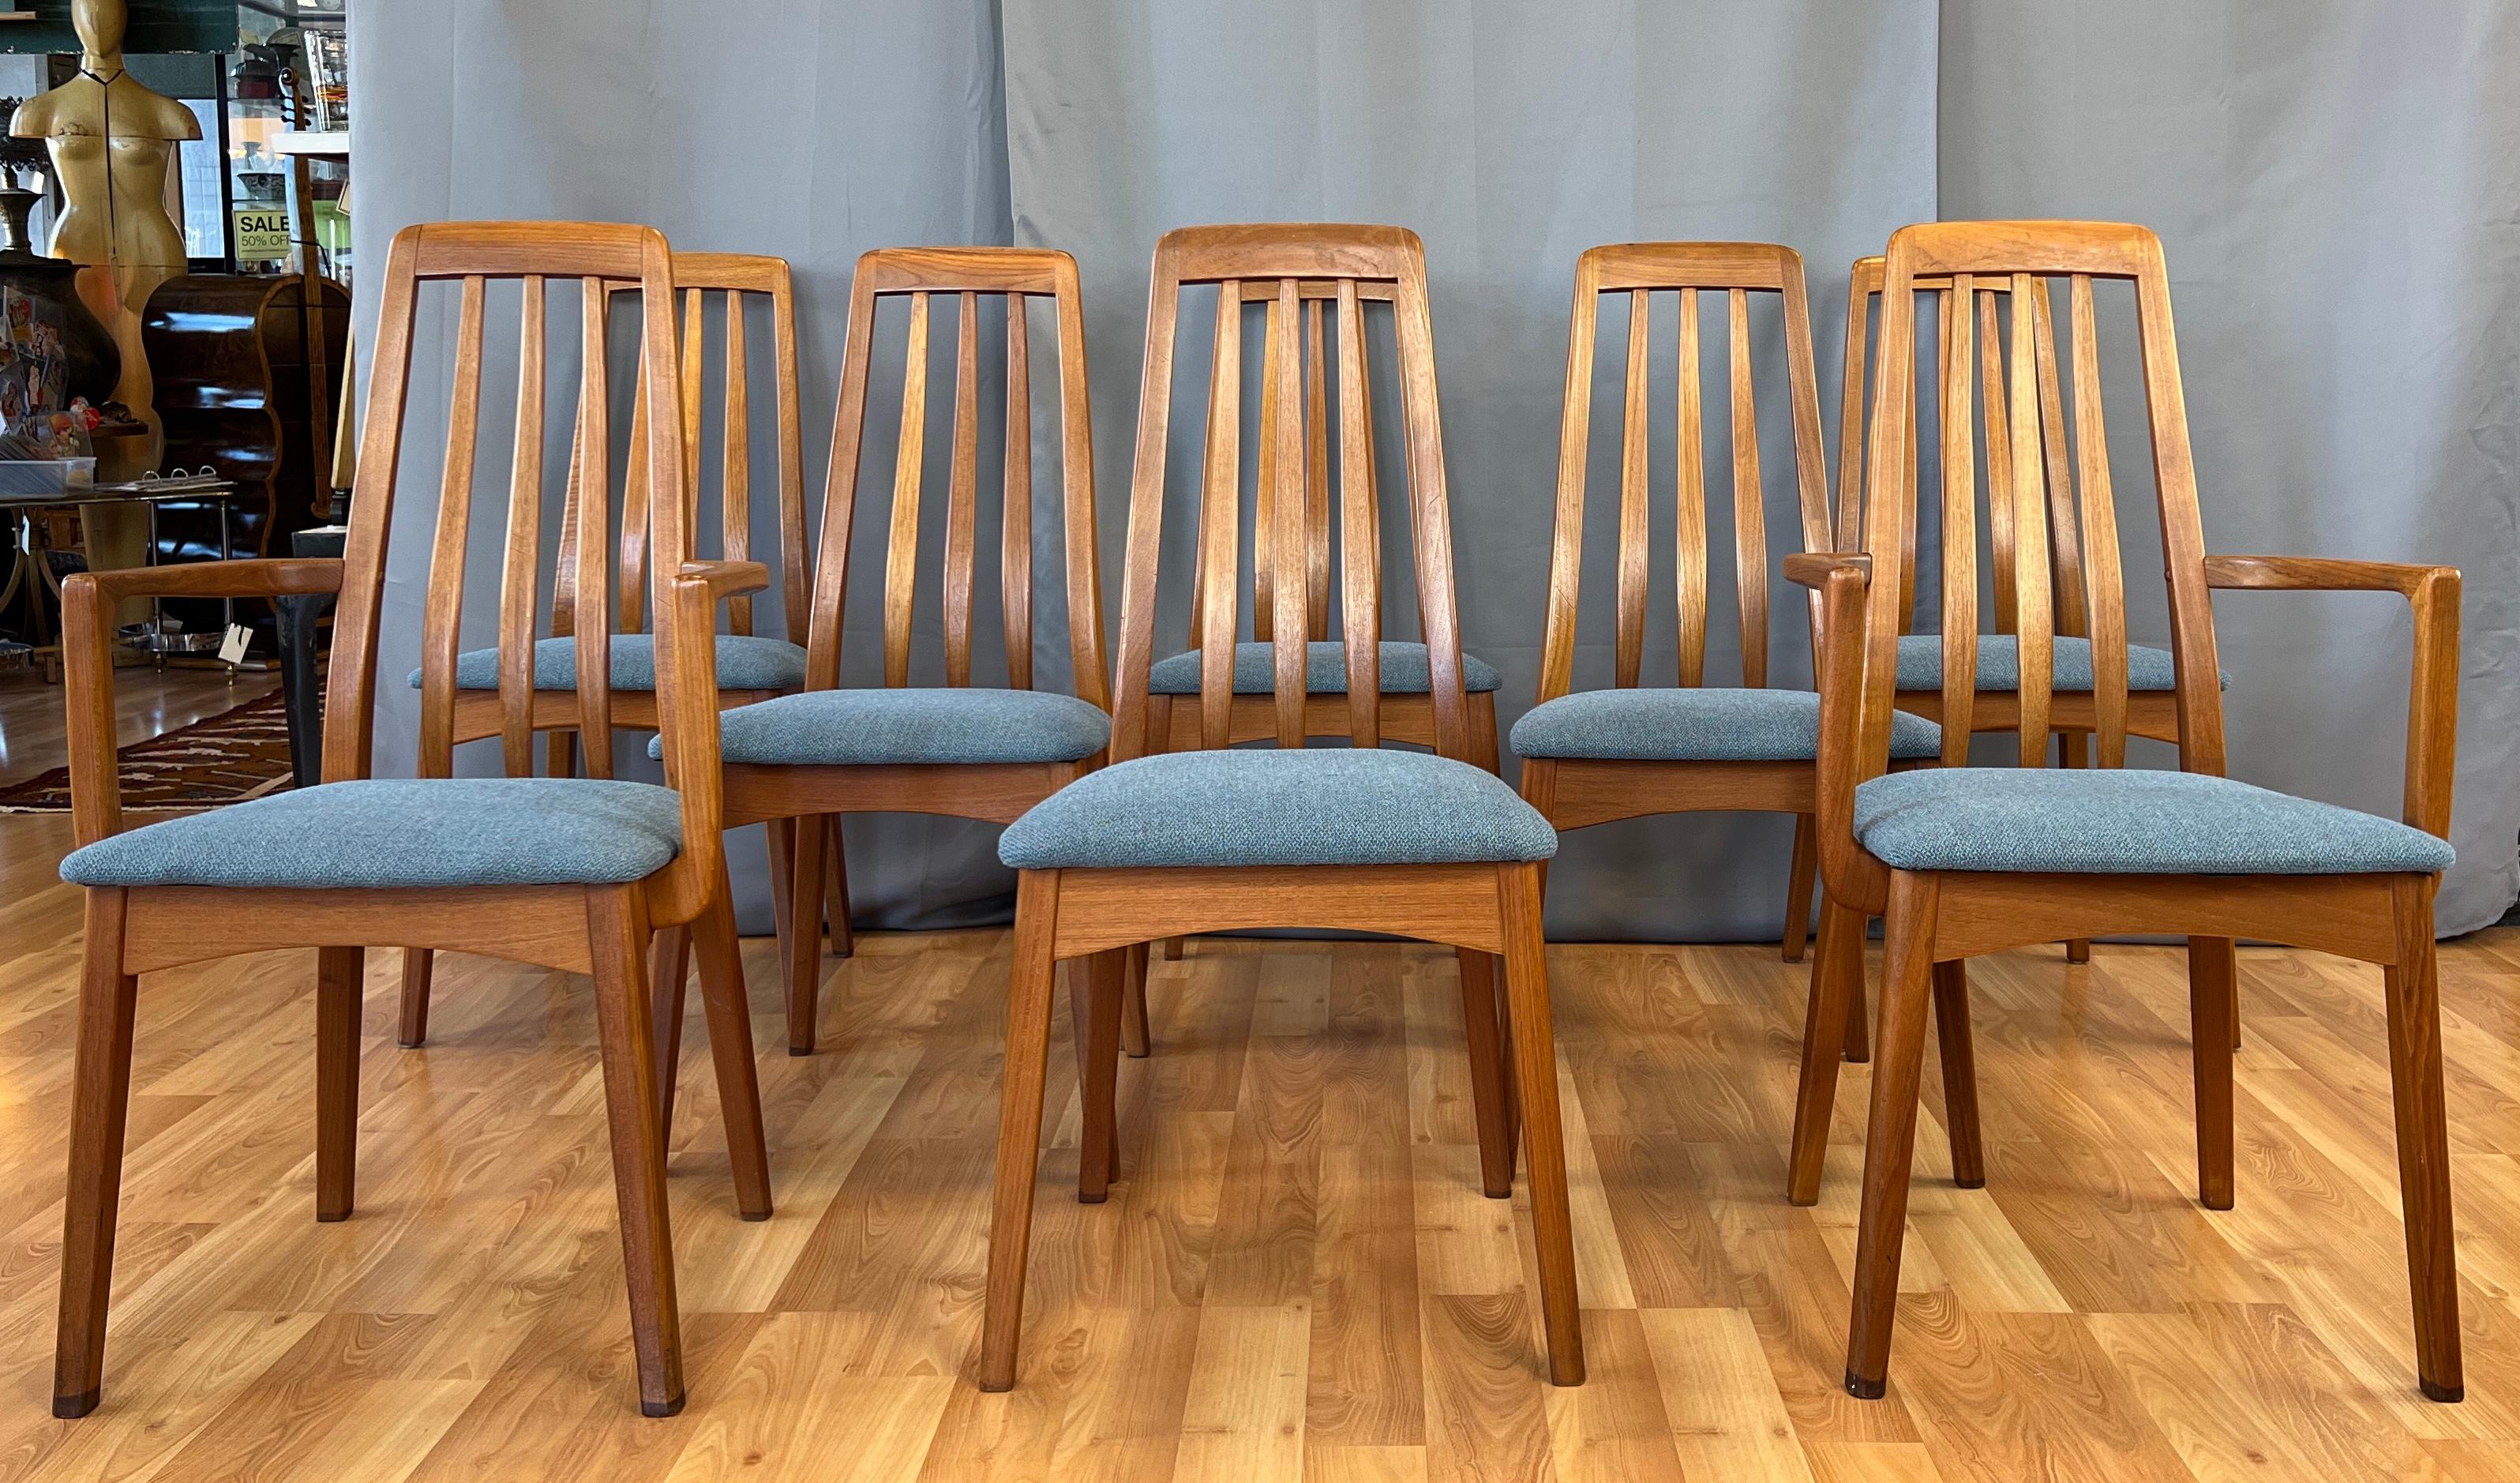 Nice large eight piece high-back set, a rail-back design. Teak dining chairs by Benny Linden, Danish Modern in style.
Two captain chairs, and six side chairs, all have the same blueish green upholstery that feels to be a blend.
With their curved